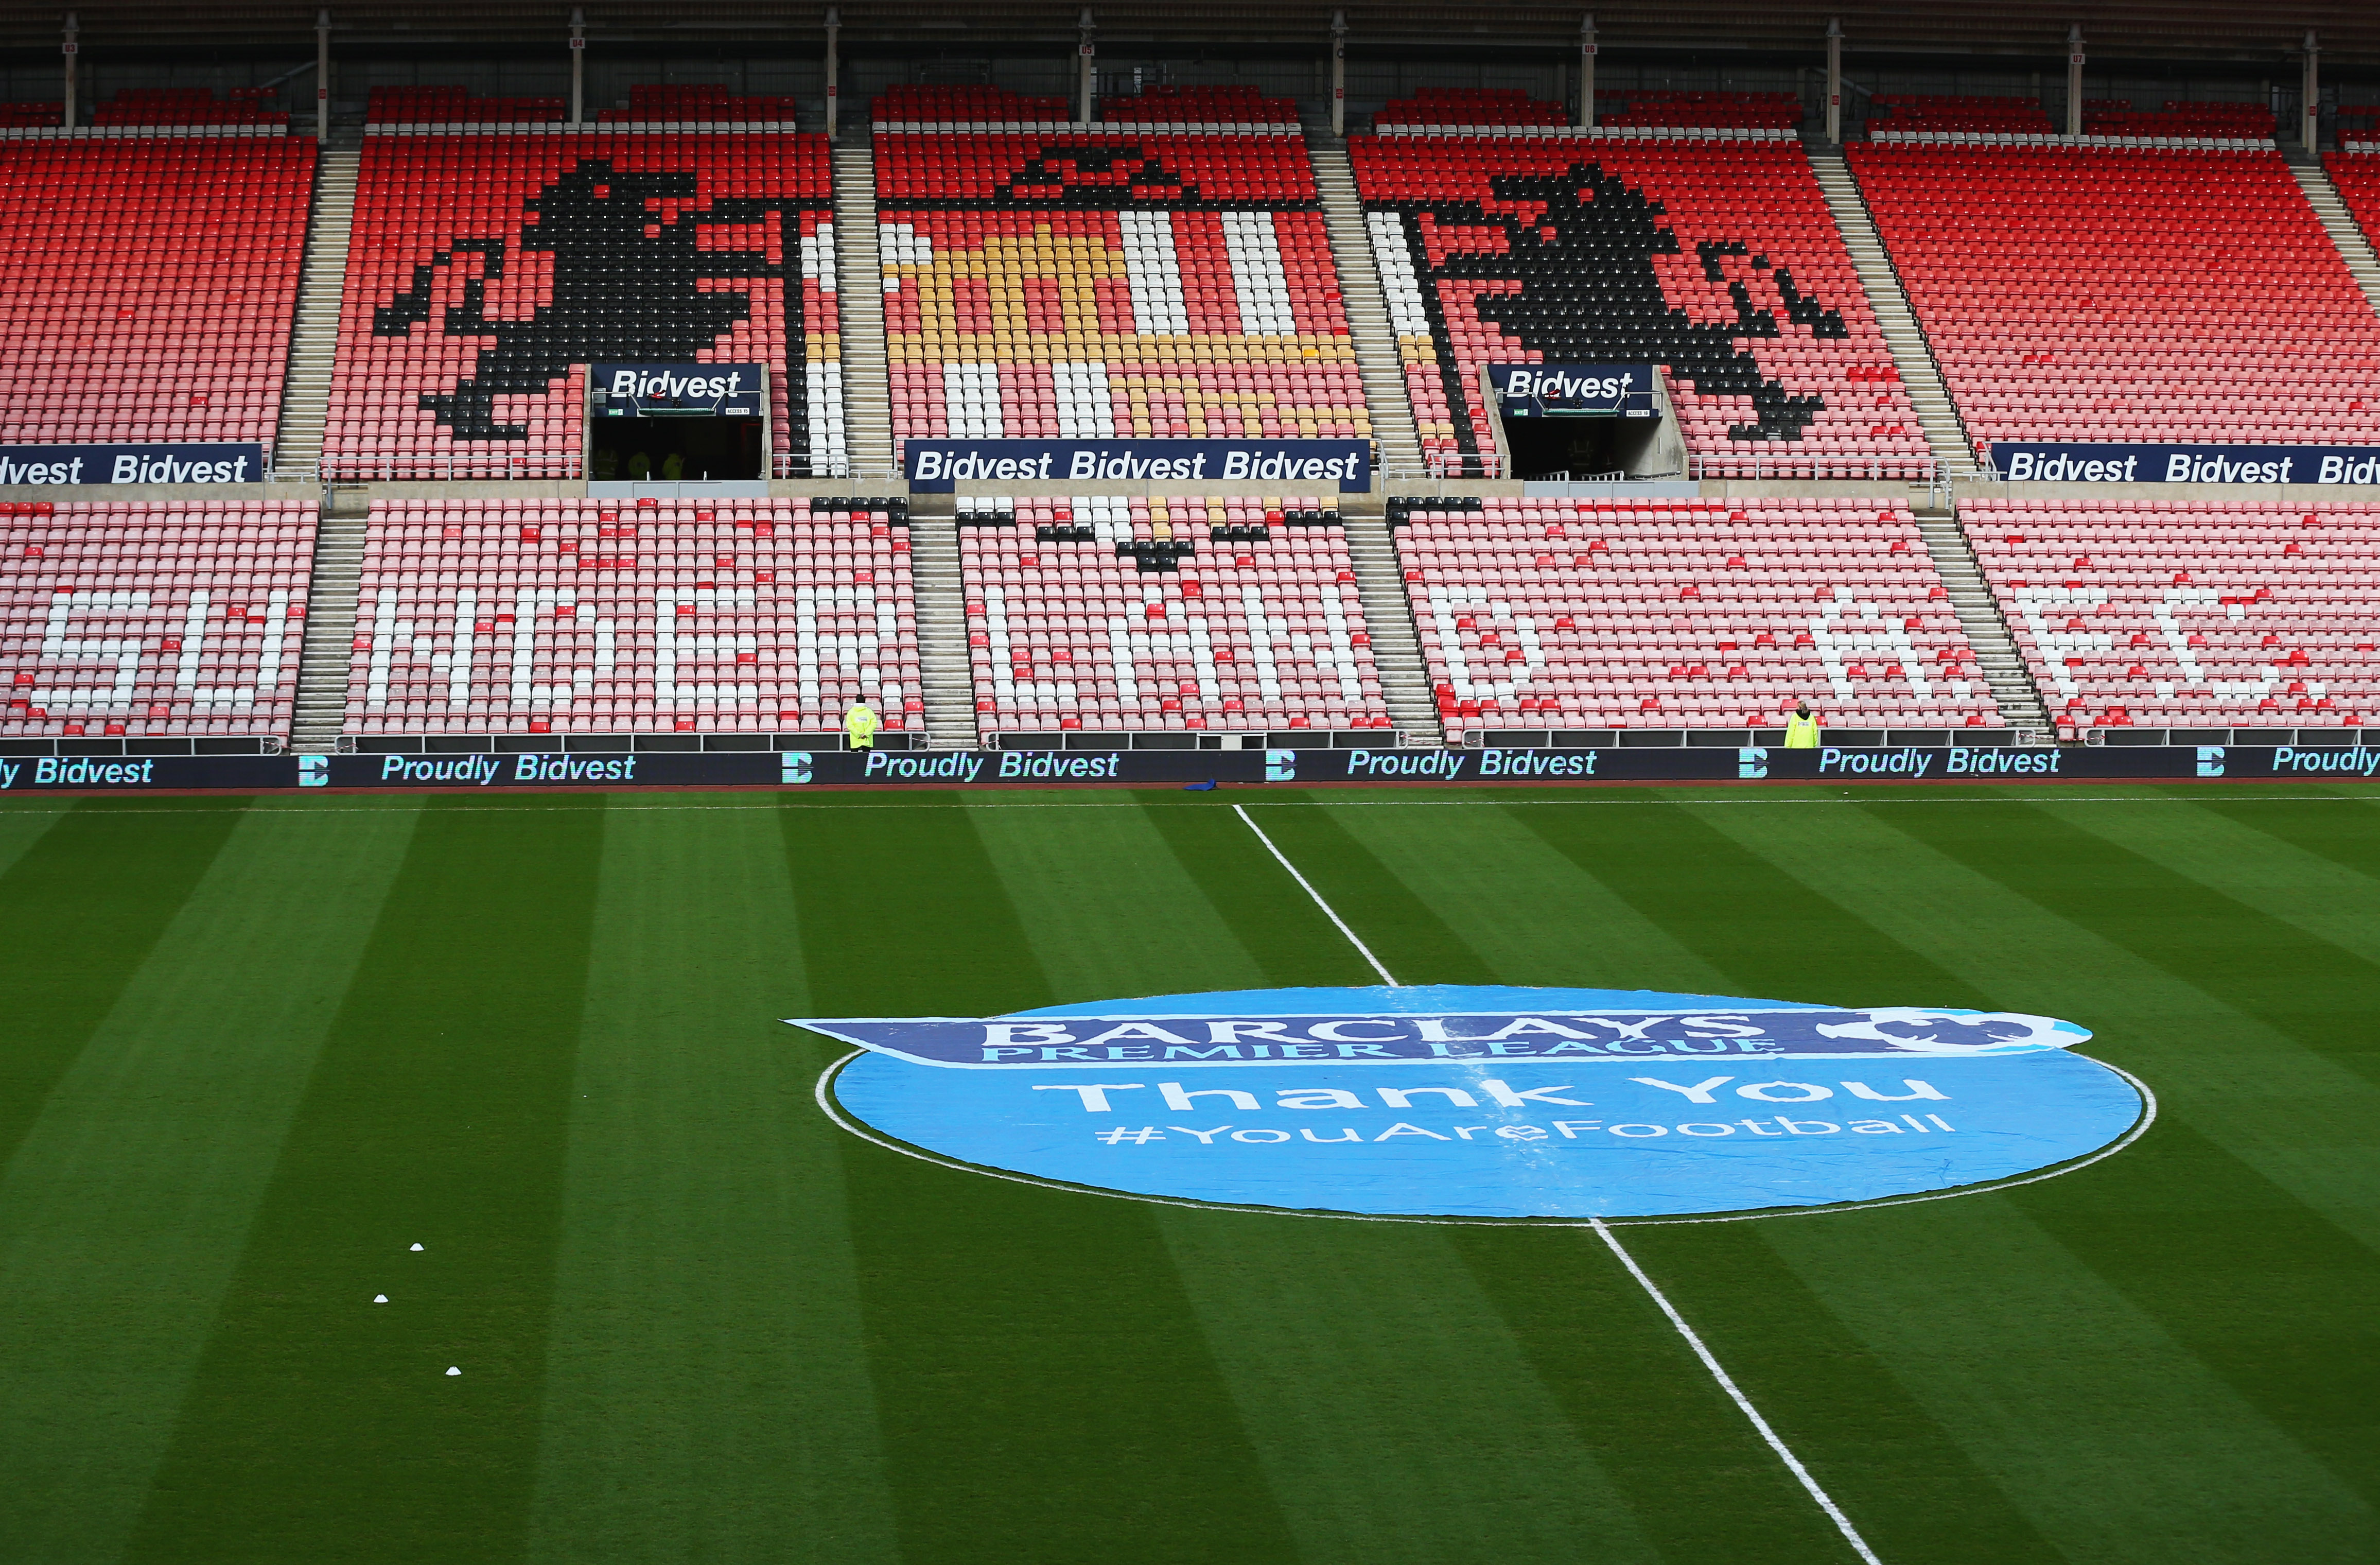 SUNDERLAND, ENGLAND - MAY 07:  On pitch logo on display prior to the Barclays Premier League match between Sunderland and West Bromwich Albion at Stadium of Light on May 7, 2014 in Sunderland, England.  (Photo by Alex Livesey/Getty Images)